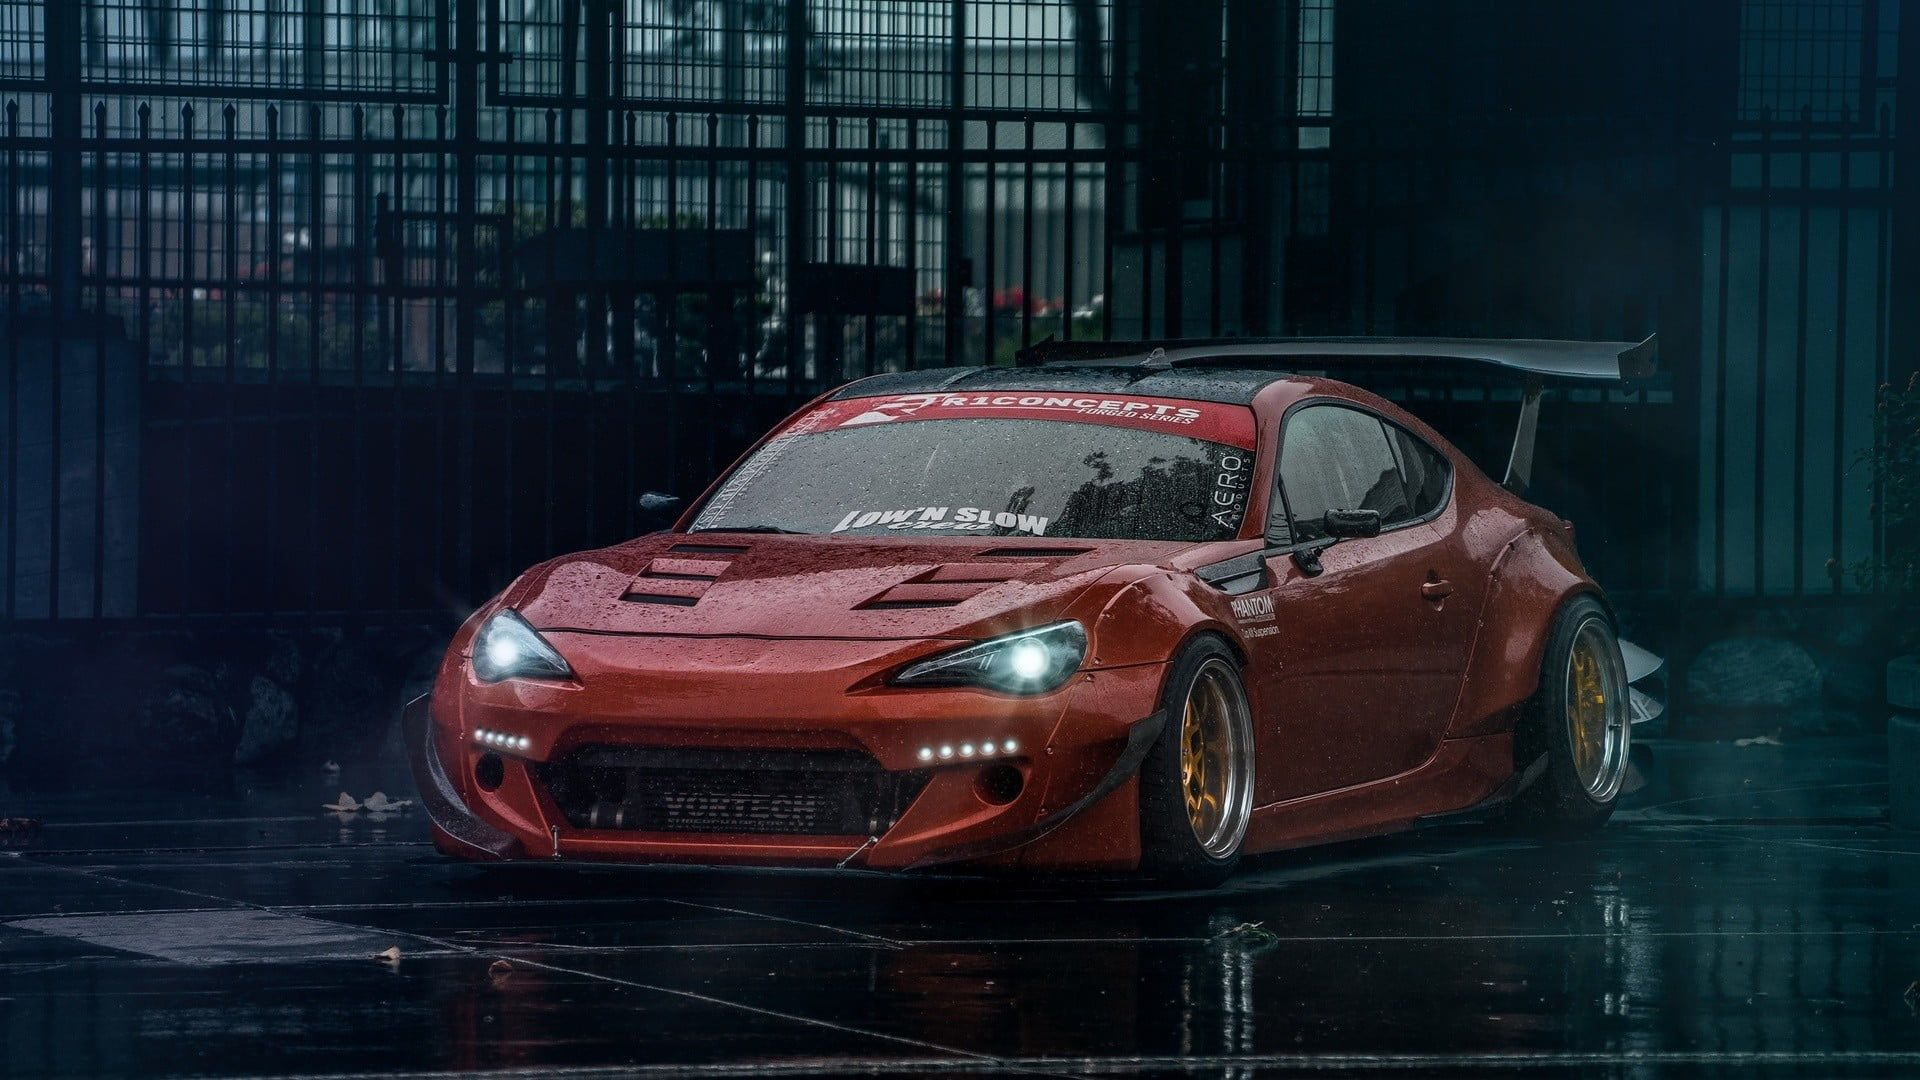 1920x1080 red coupe #car #Toyota #tuning Scion FR-S Subaru BRZ #Stance red cars Toyota GT-86 #1080P #wallpaper #hdwallpaper #desktop | Subaru brz, Toyota 86, Subaru